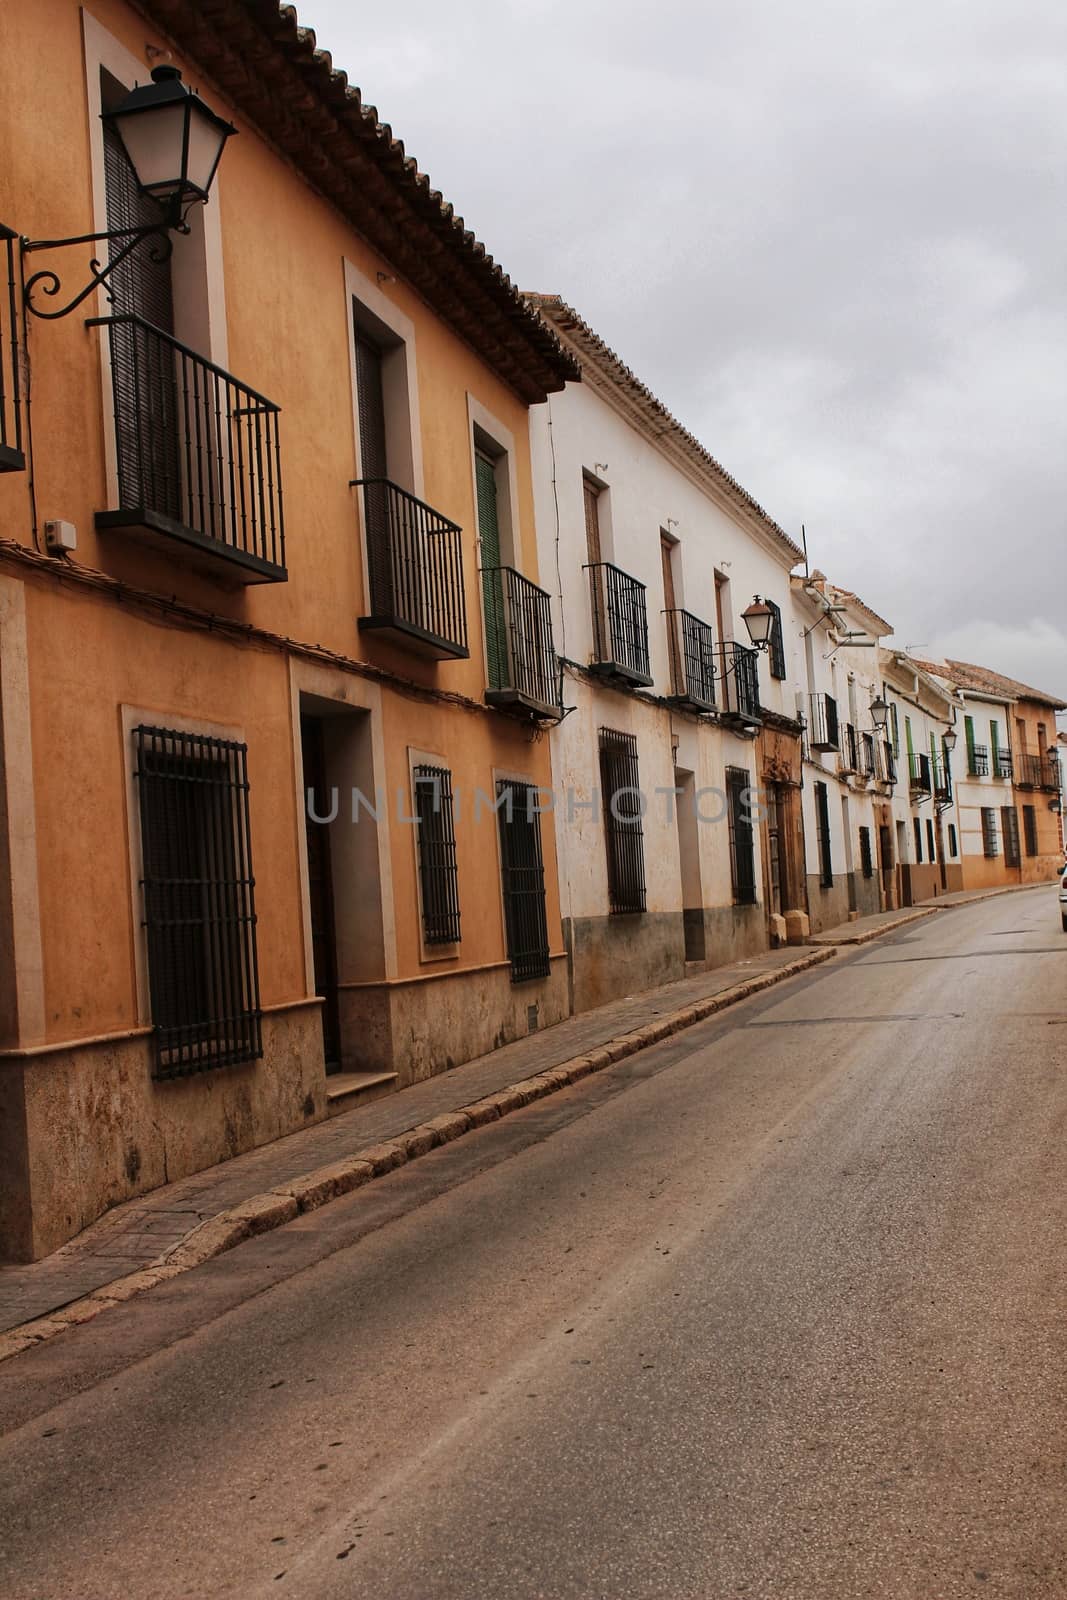 Old and majestic houses in the streets of Villanueva de los Infa by soniabonet